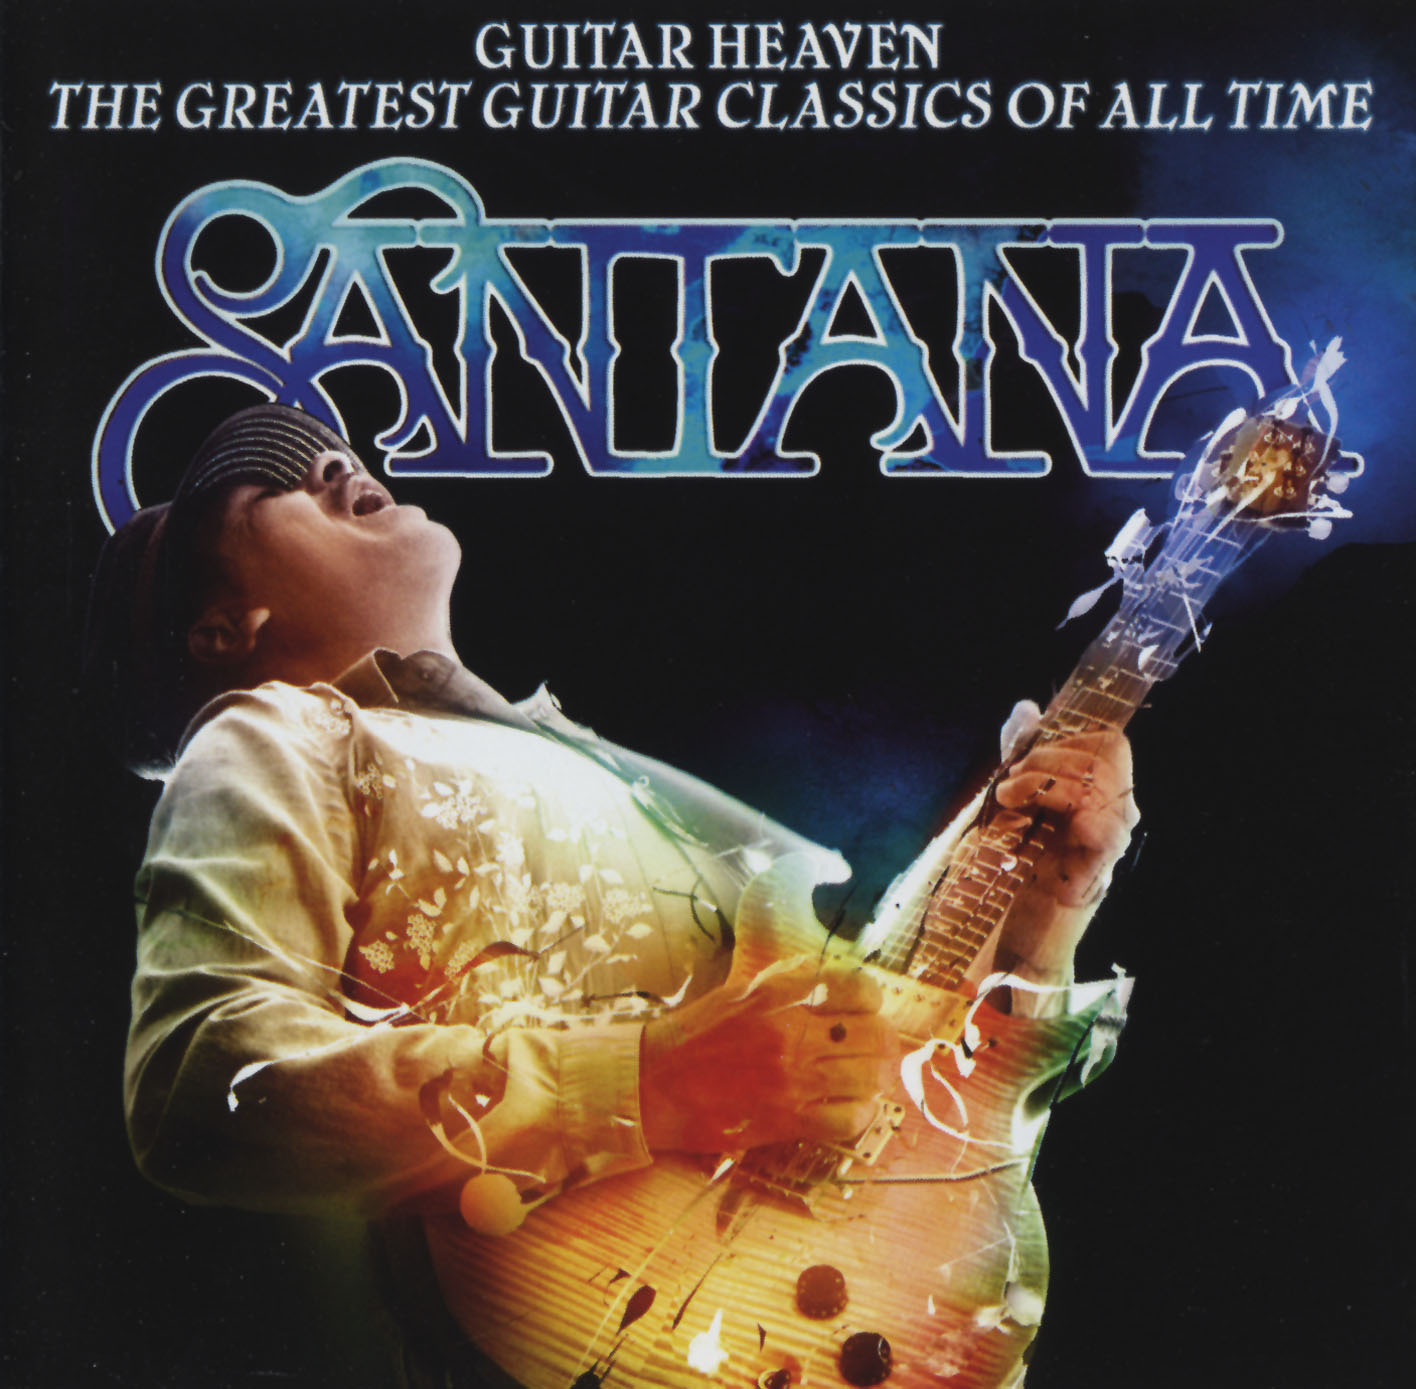 Guitar Heaven: The Greatest Guitar Classics Of All Time